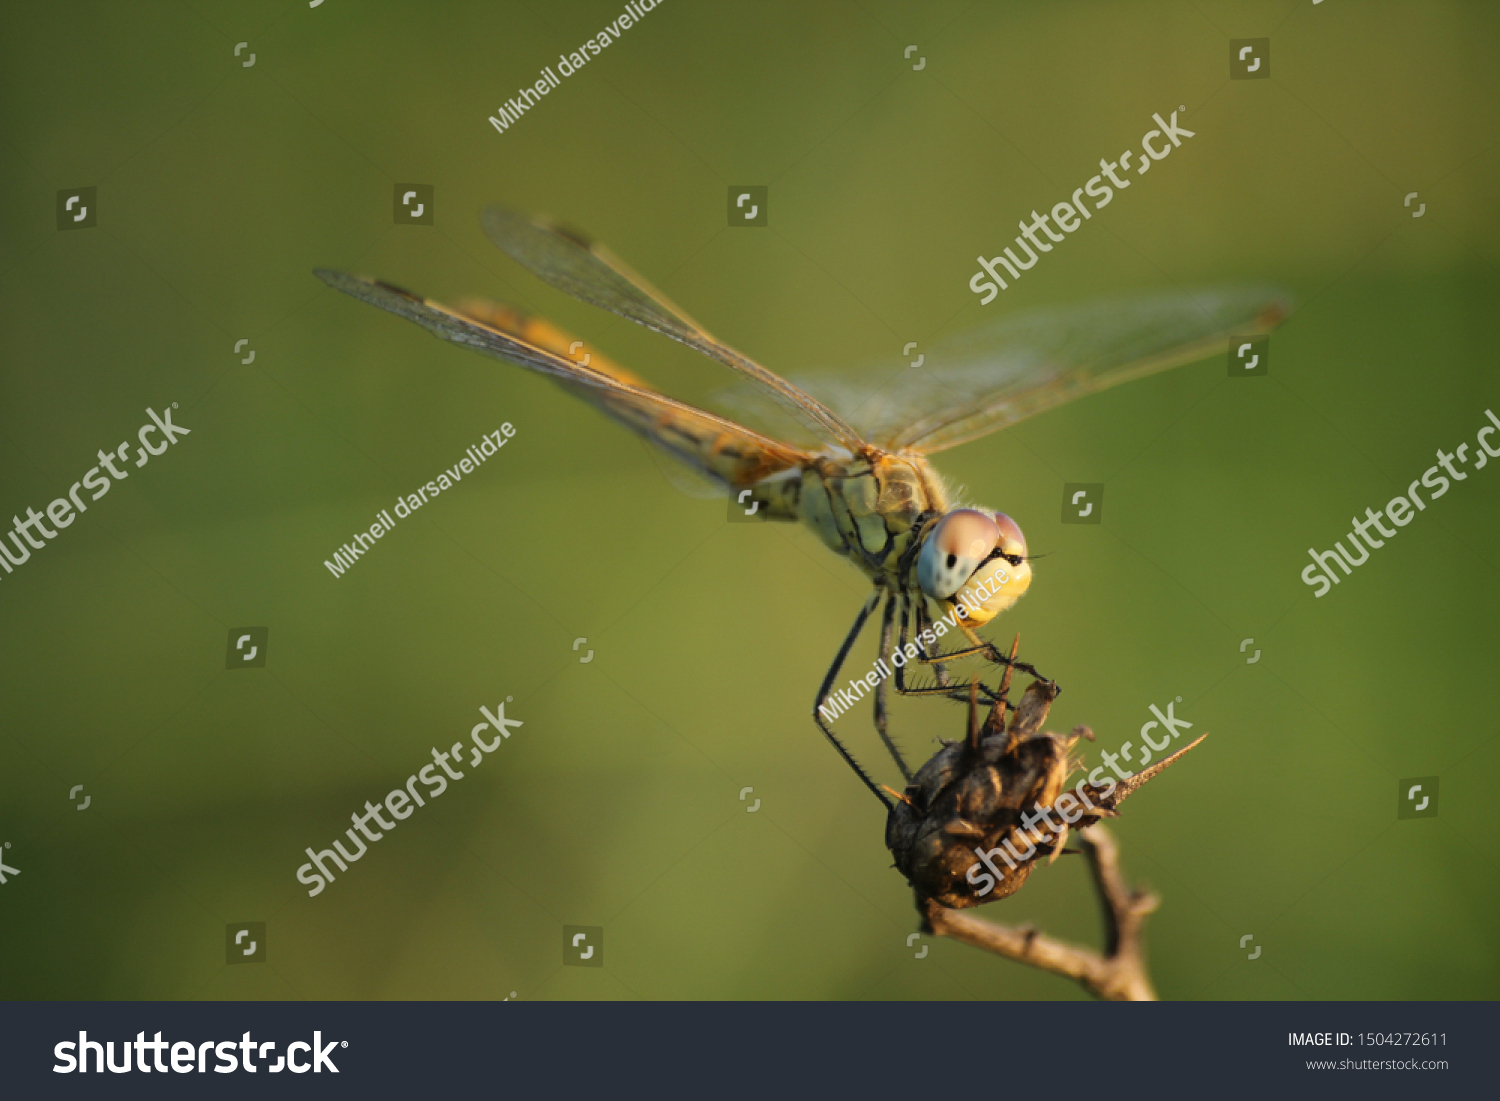 Beautiful yellow dragonfly. Close up dragonfly image. #1504272611